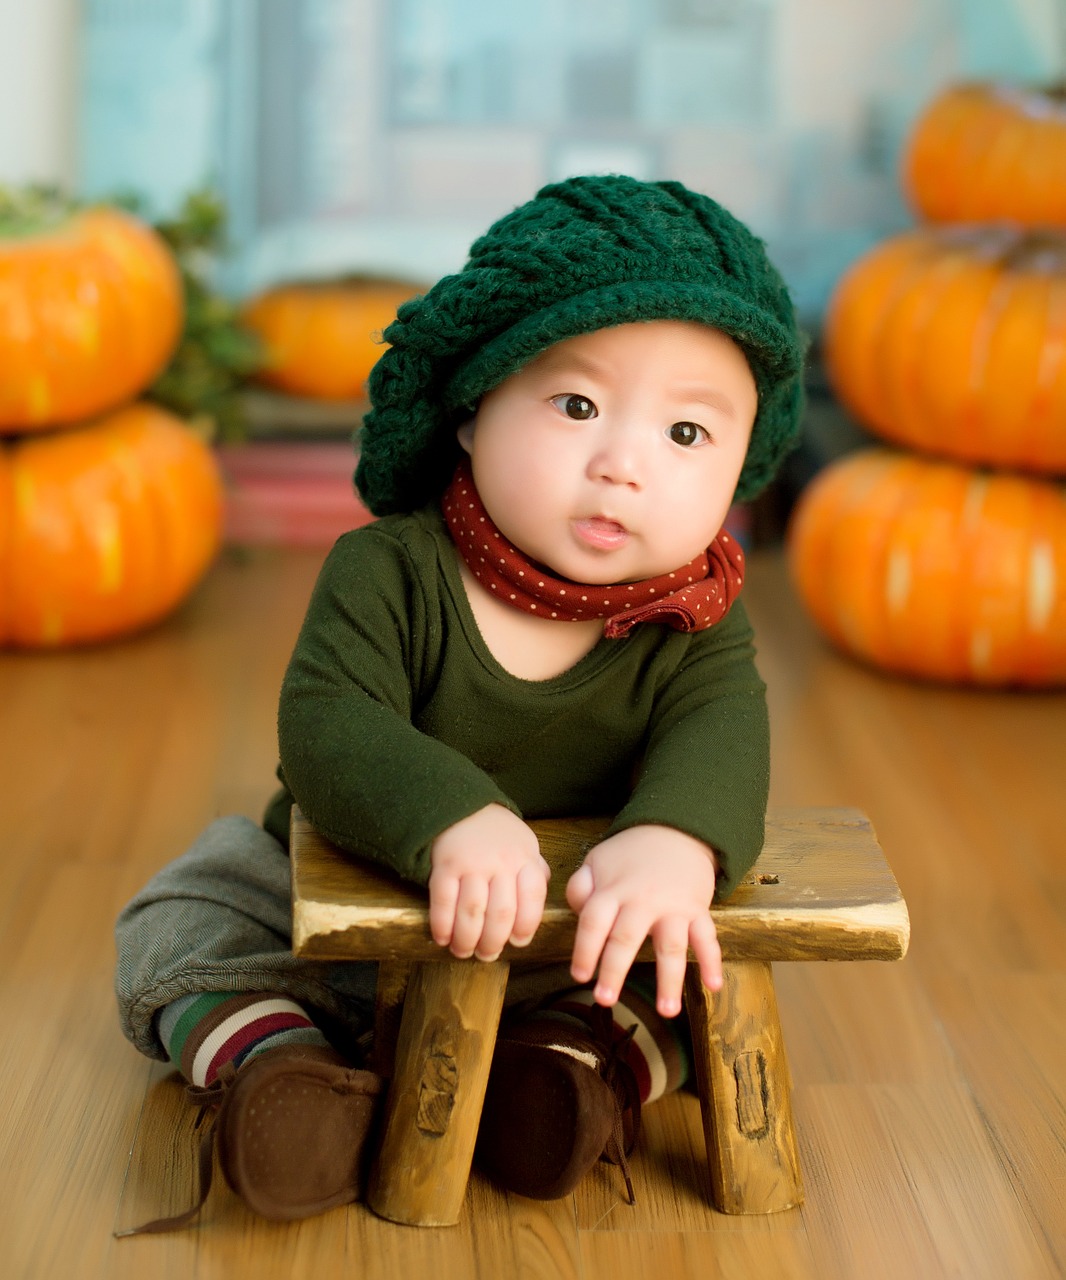 13 Cute and Modern Baby Photography